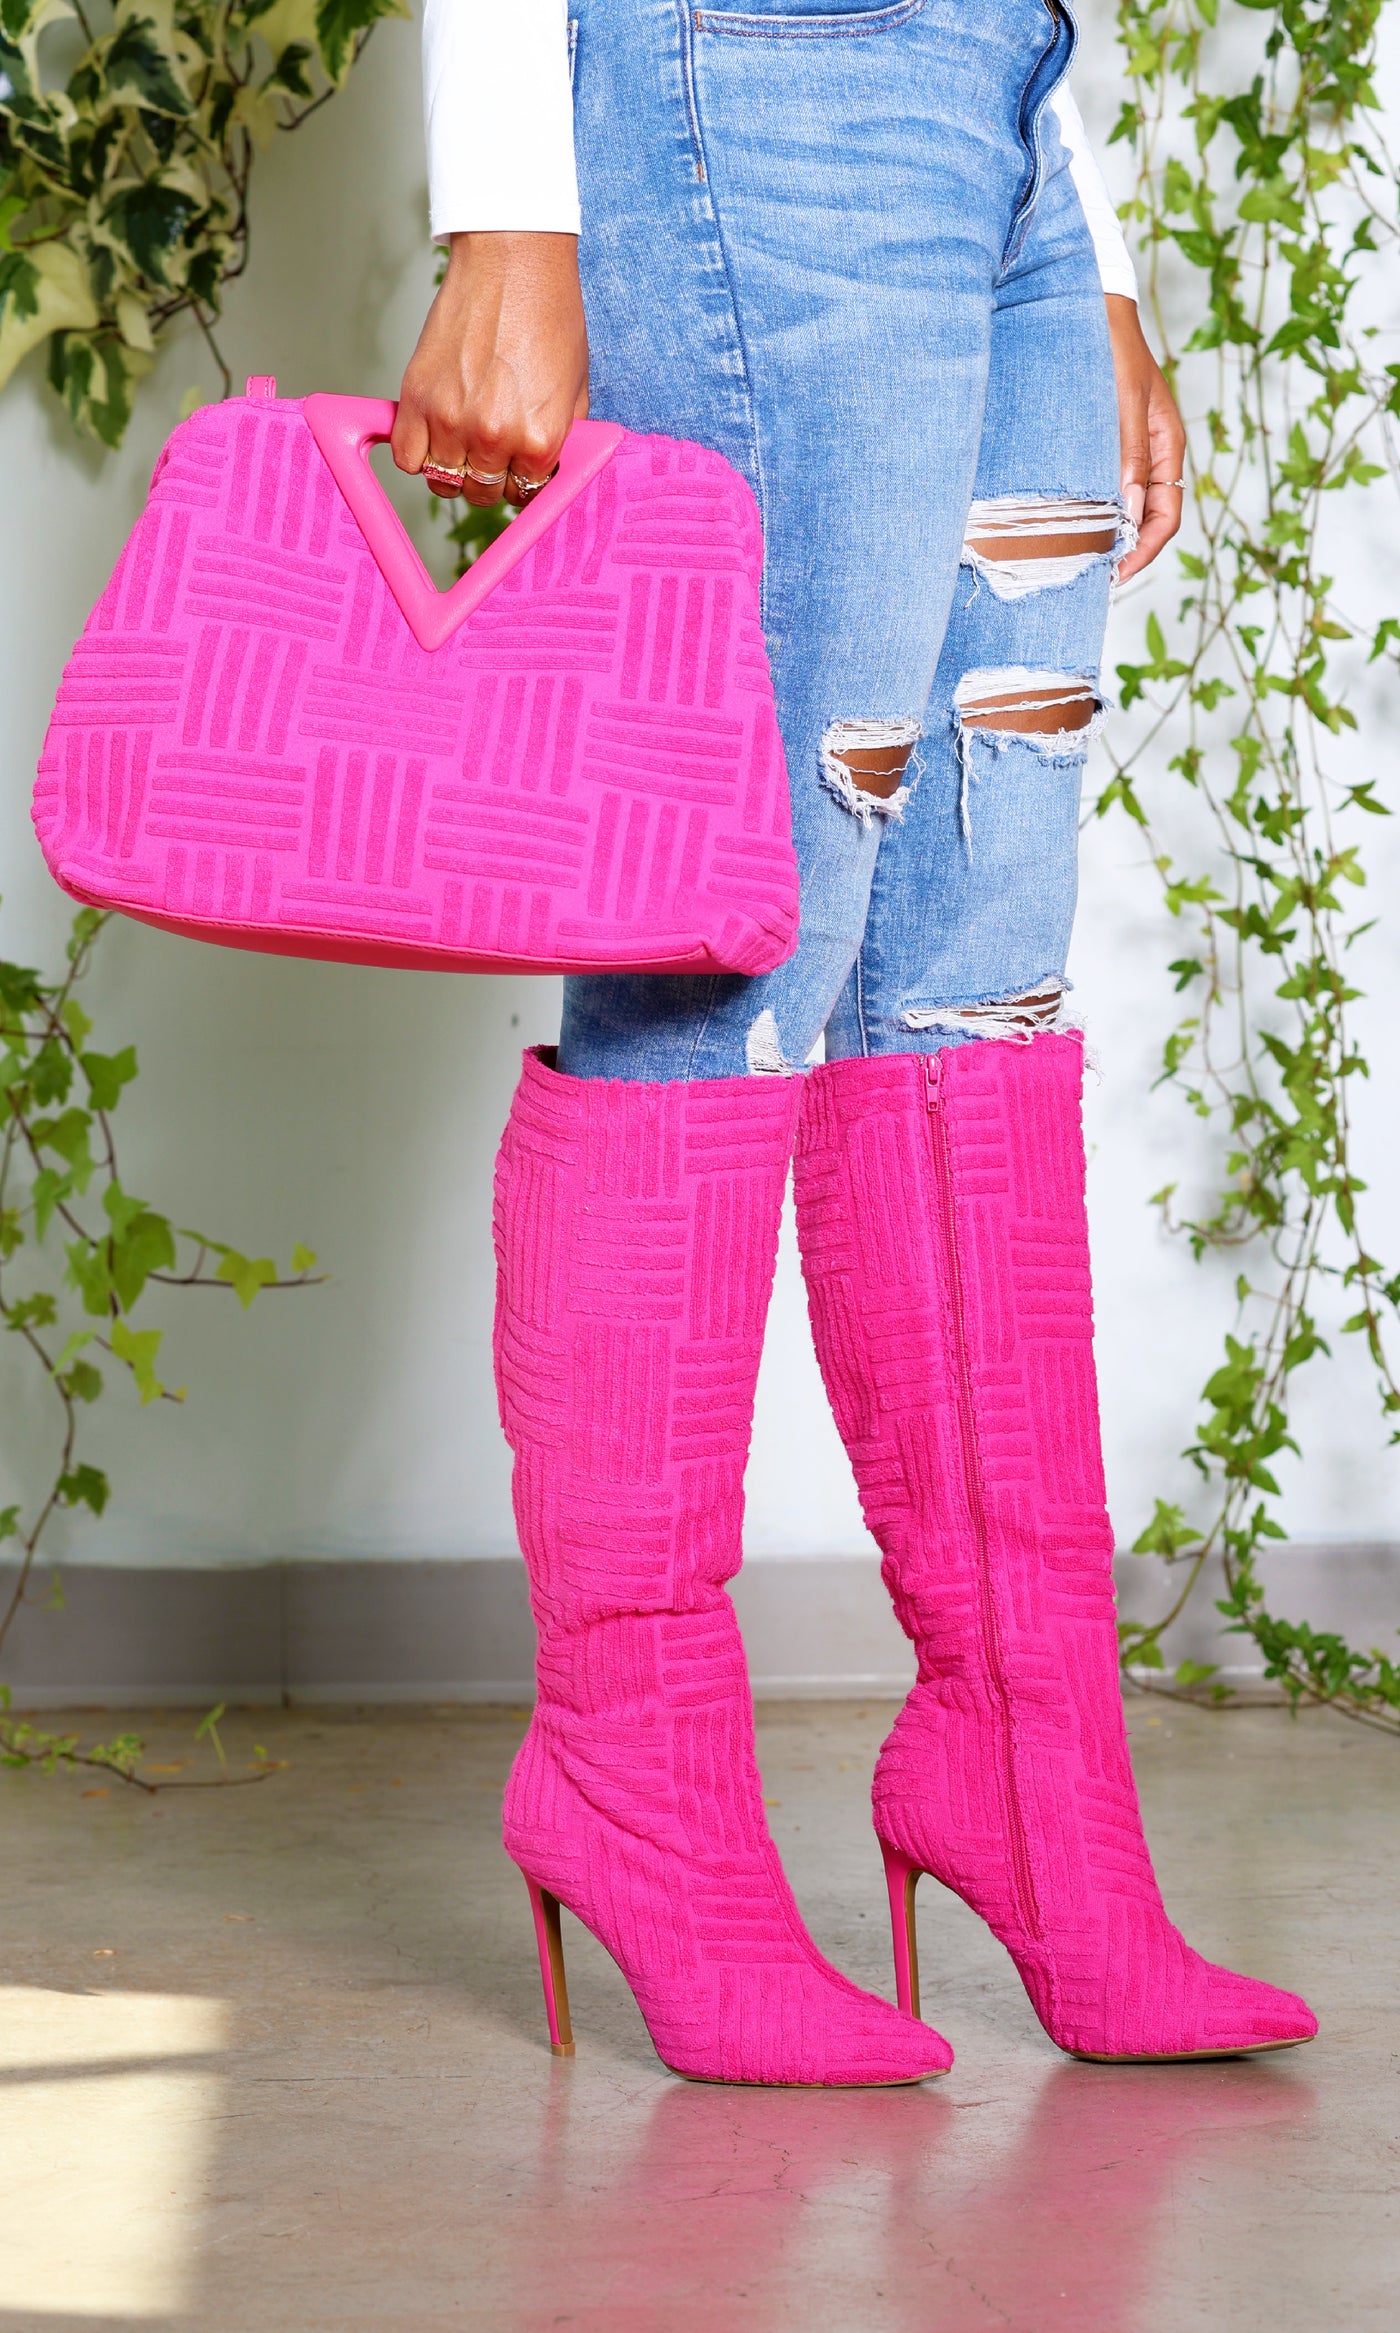 Pink Terry Knee Boots - Cutely Covered